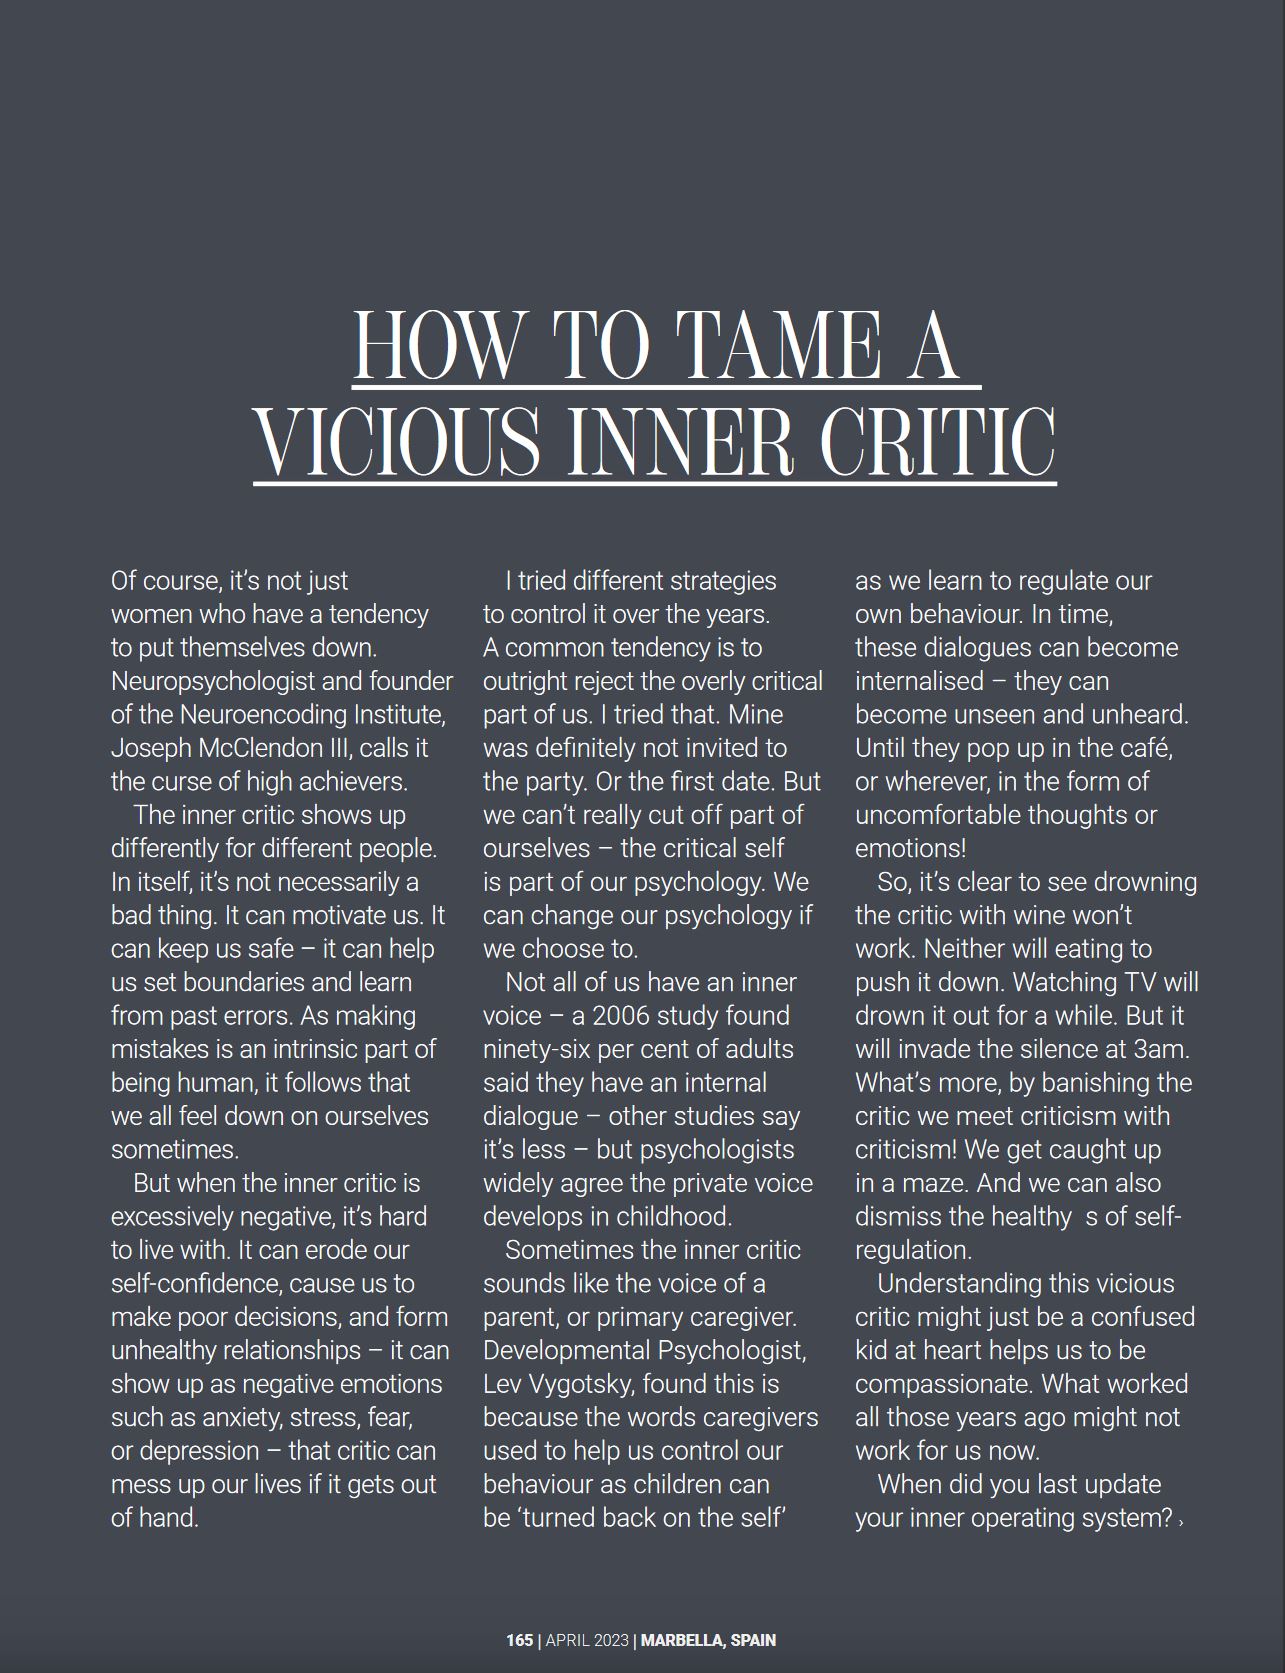 The Unruly Mind - How to Tame and Vicious Inner Critic by Ali Lochhead. An article in Marbella Essential Magazine. Page 2